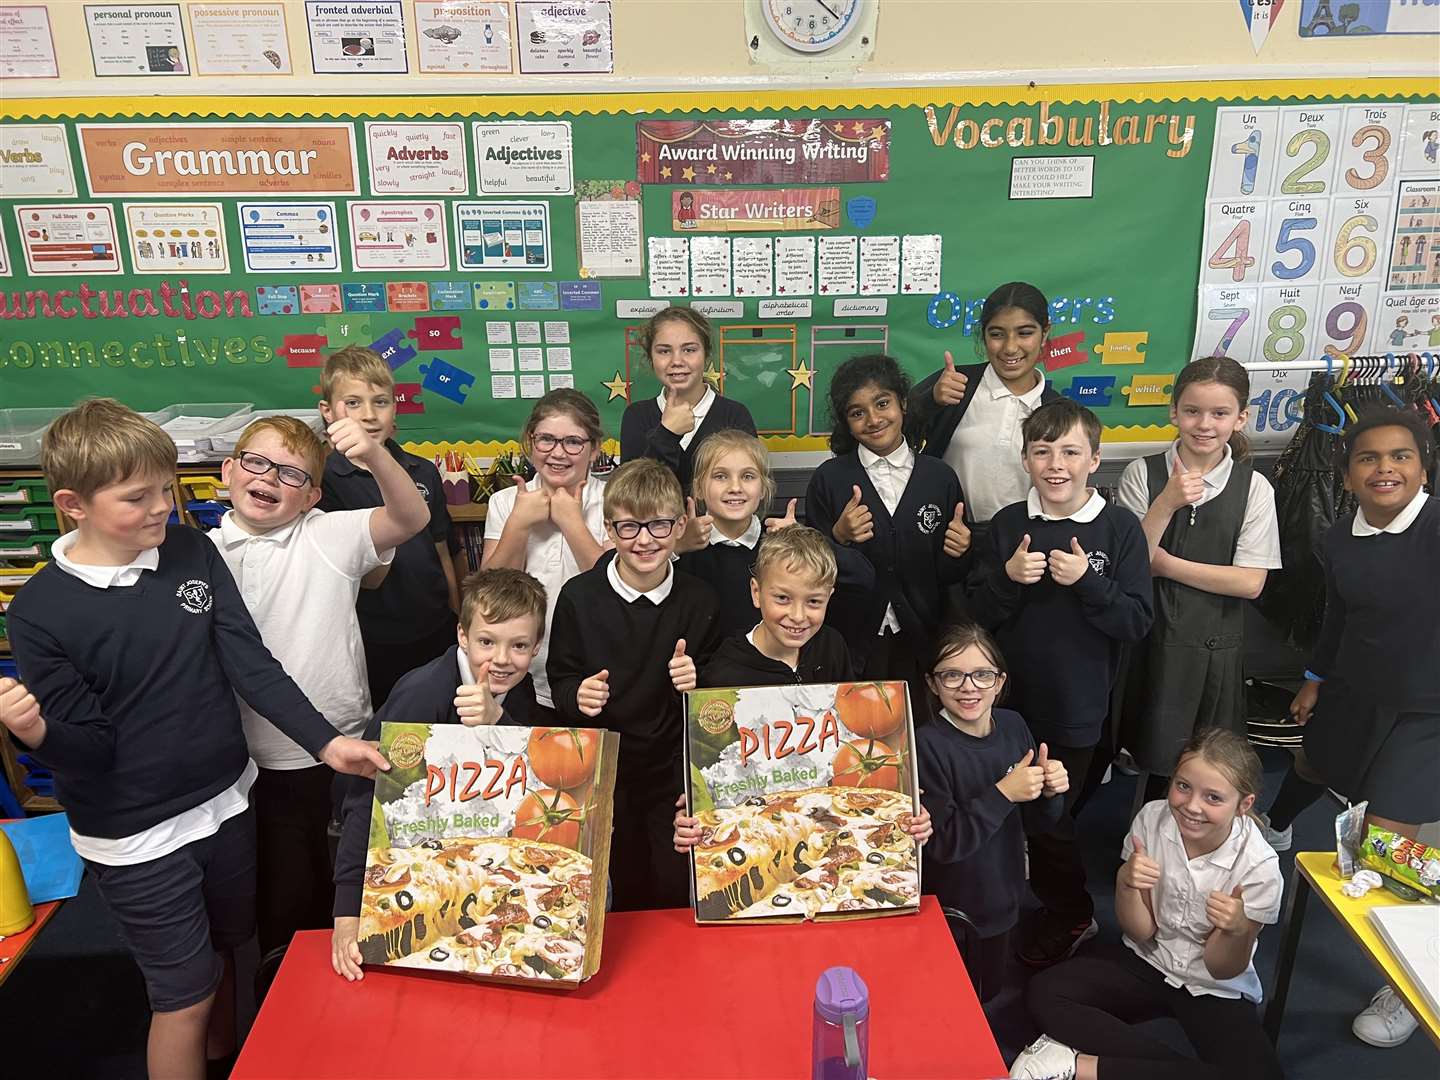 Pupils were delighted with their pizza prize.